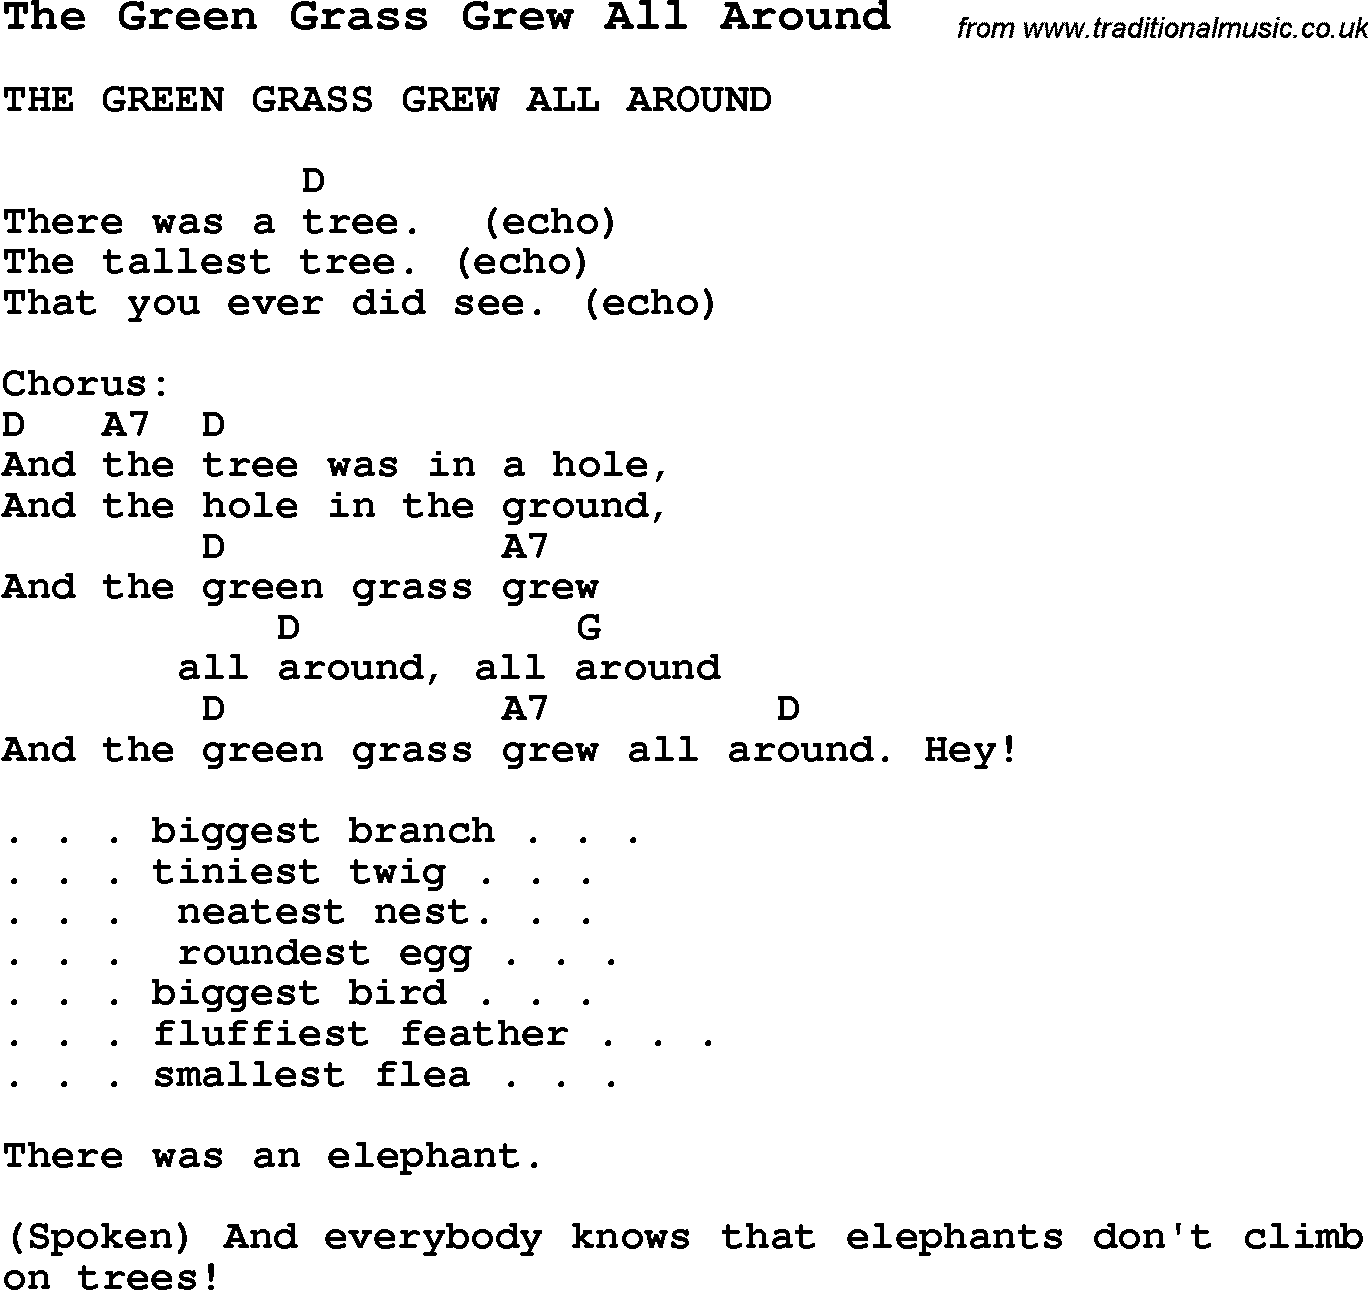 Summer-Camp Song, The Green Grass Grew All Around, with lyrics and chords for Ukulele, Guitar Banjo etc.